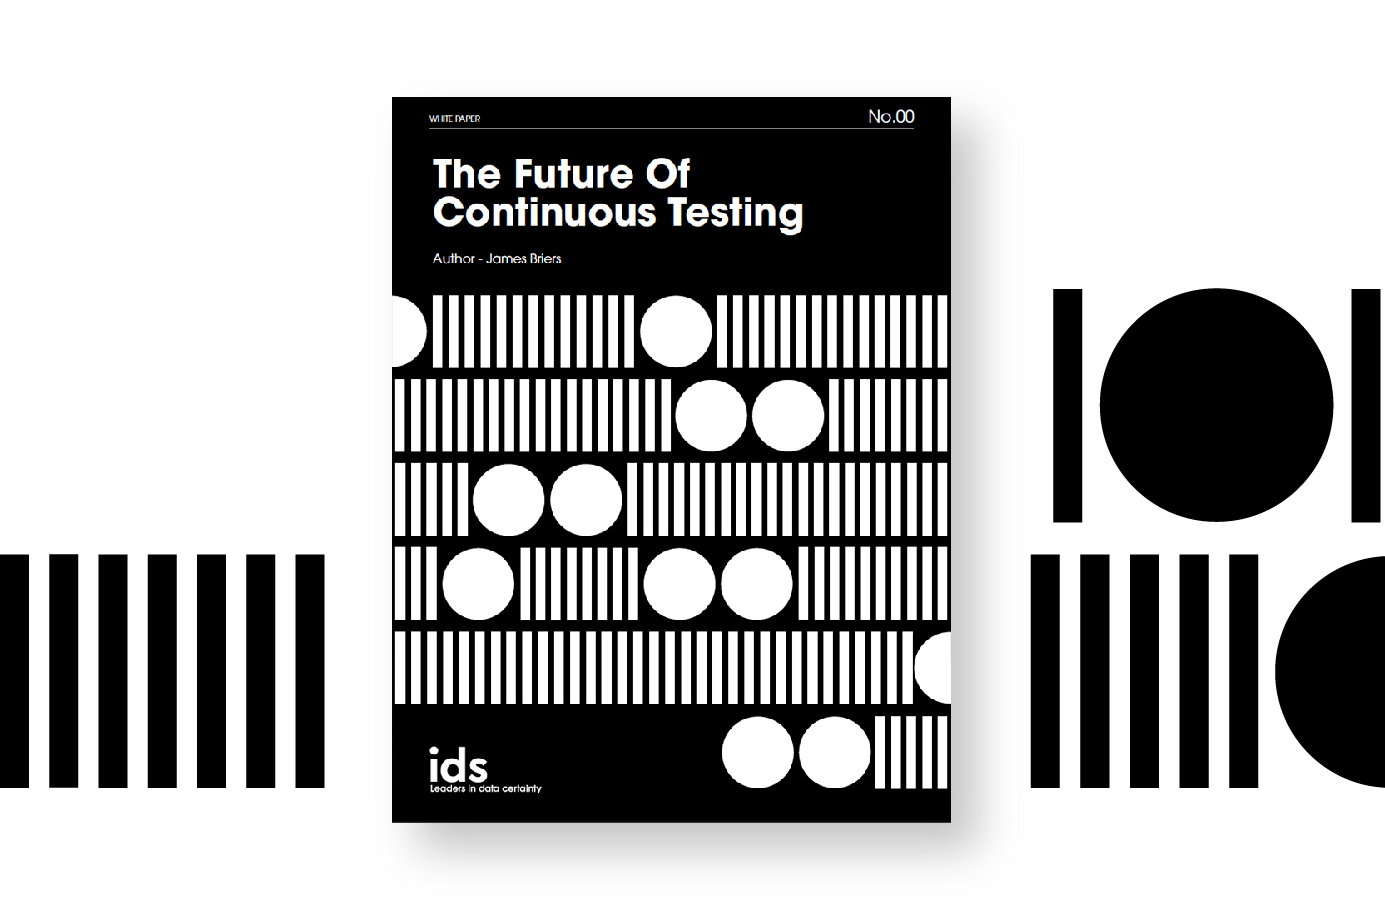 The Future of Continuous Testing White Paper